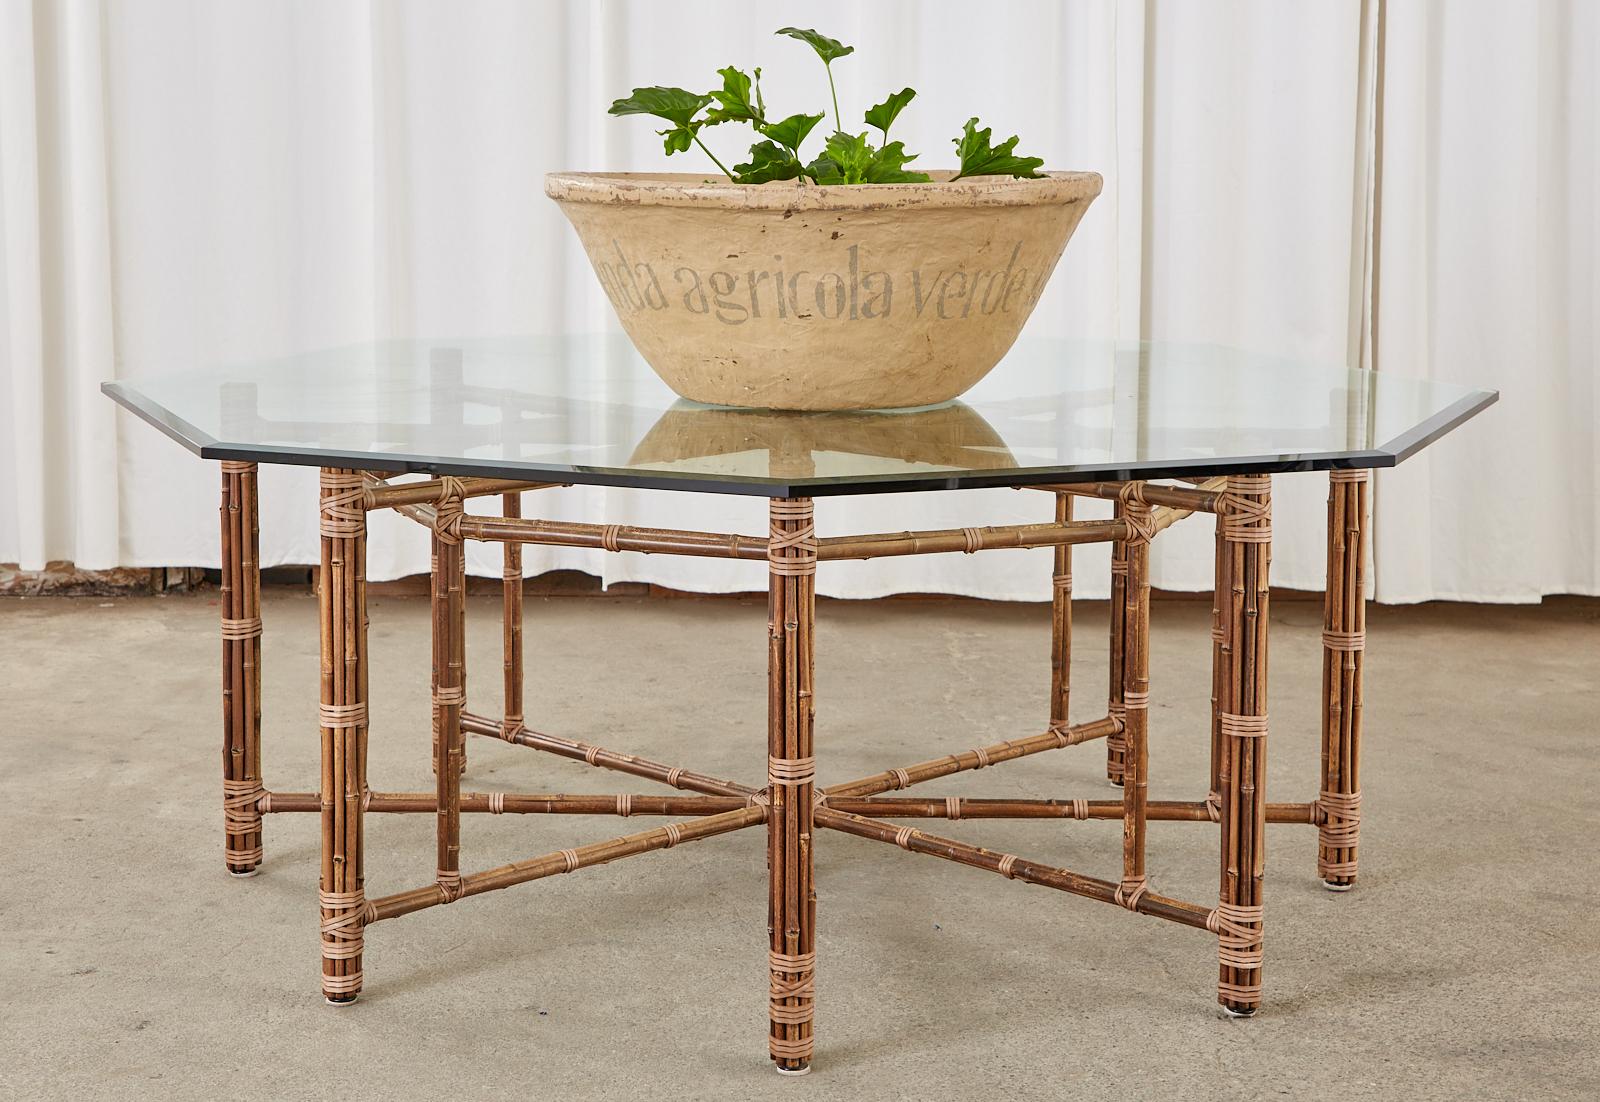 Genuine McGuire bamboo rattan dining table made in the California organic modern style designed by John McGuire. Crafted from an iron skeleton painted golden gate orange for authenticity. The iron base is then covered with rattan poles lashed